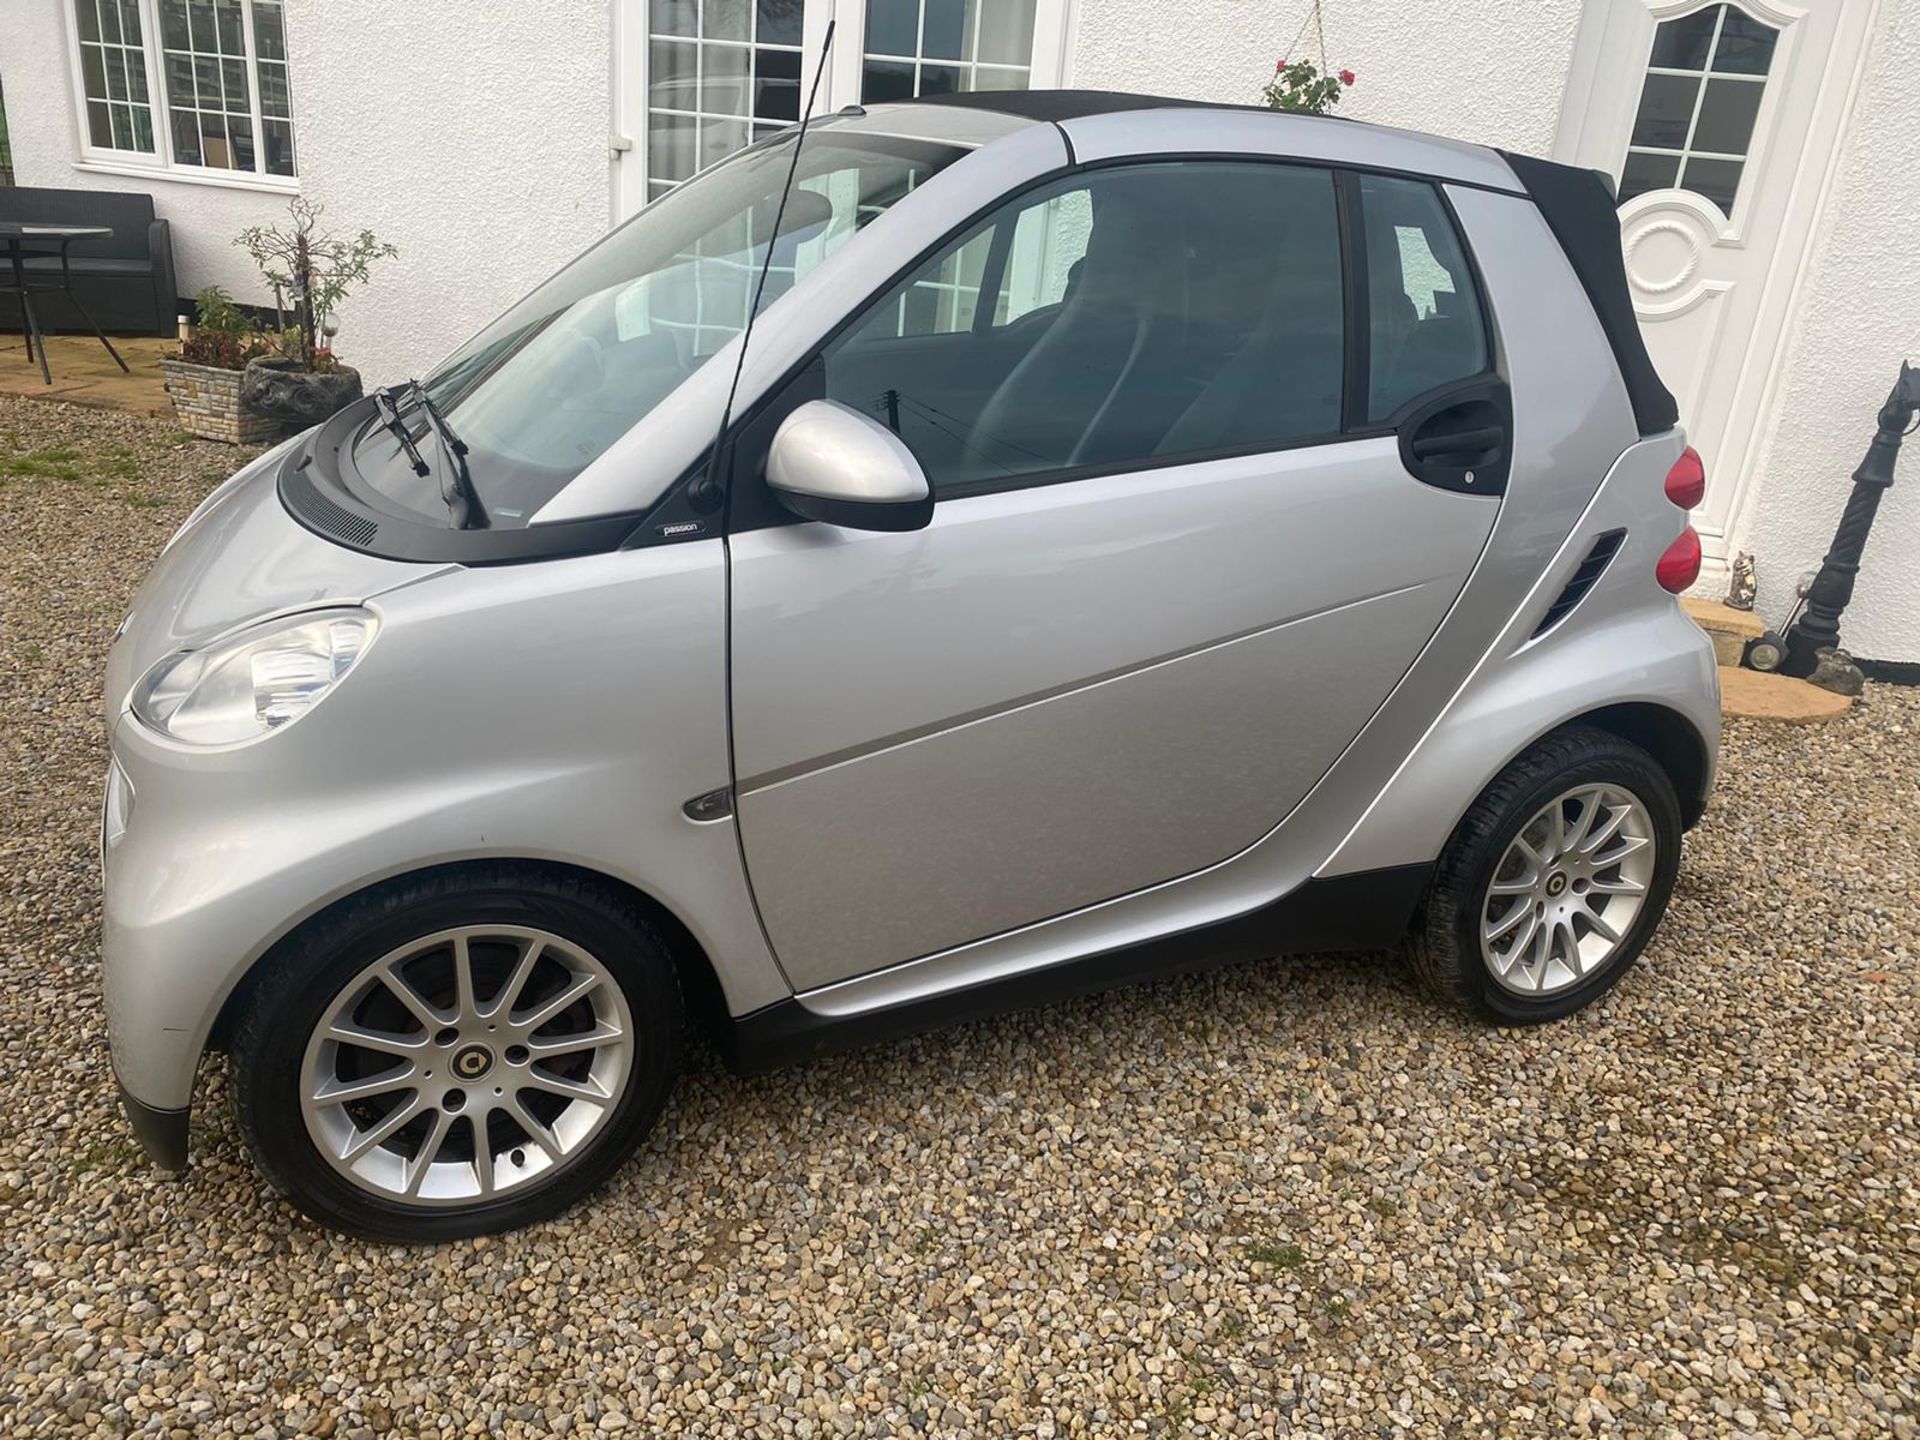 2008/08 REG SMART FORTWO PASSION 71 AUTO 999CC PETROL SILVER CONVERTIBLE, SHOWING 2 FORMER KEEPERS - Image 4 of 13